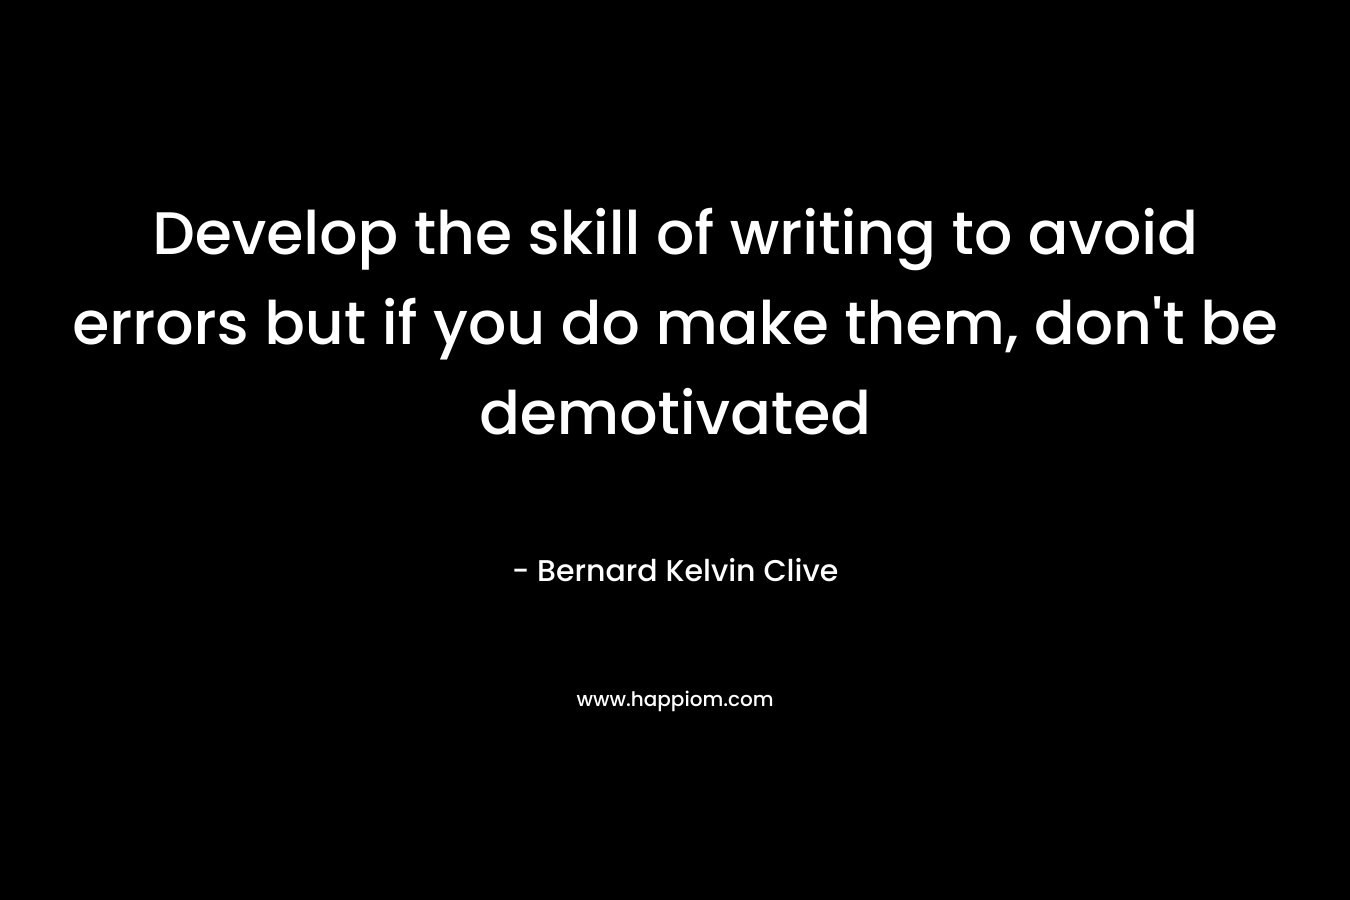 Develop the skill of writing to avoid errors but if you do make them, don’t be demotivated – Bernard Kelvin Clive